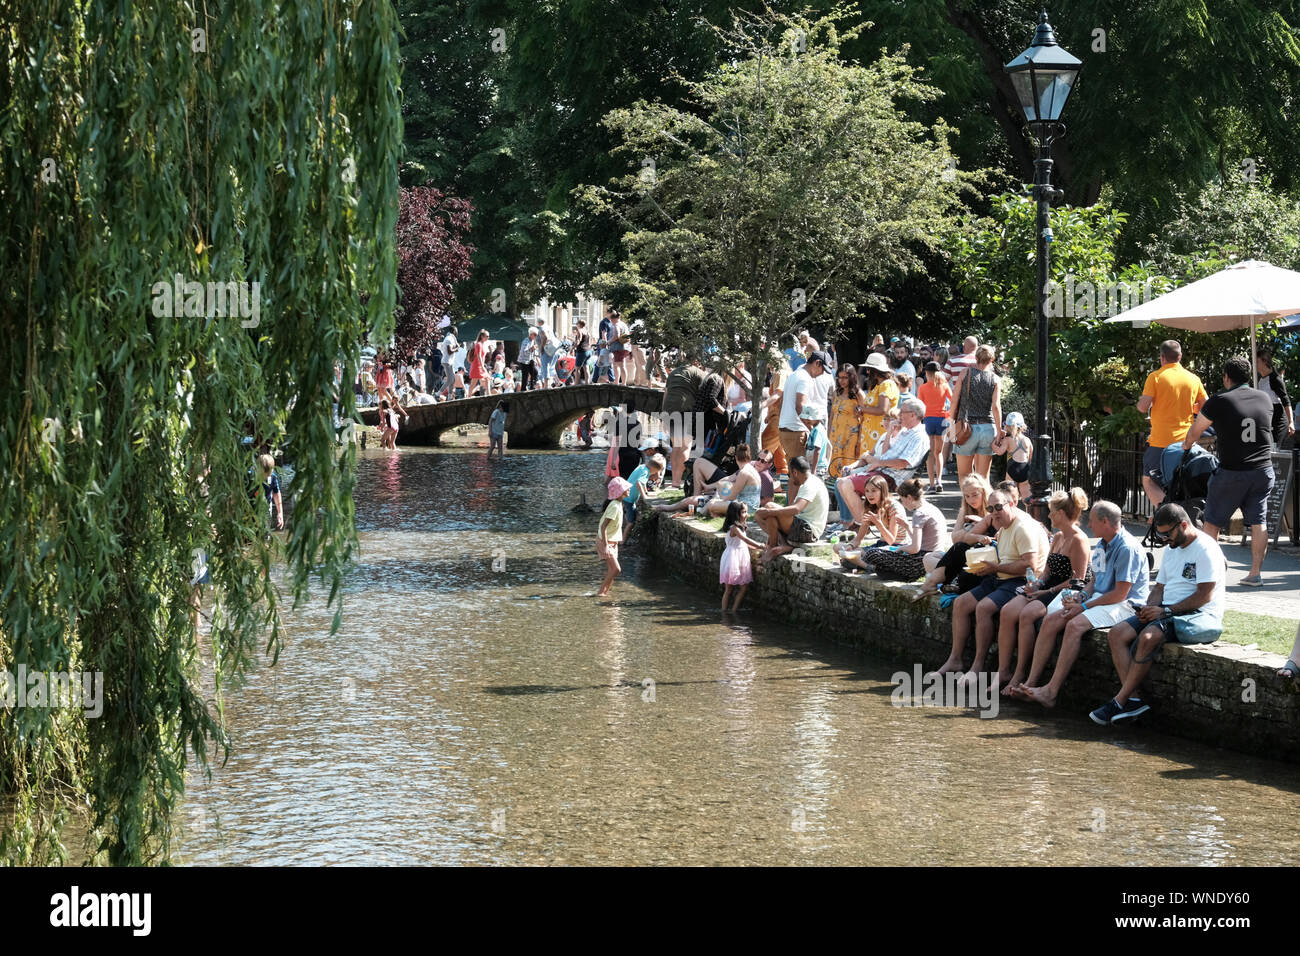 August Bank Holiday festivities in Bourton-on-the Water Gloucestershire UK Stock Photo